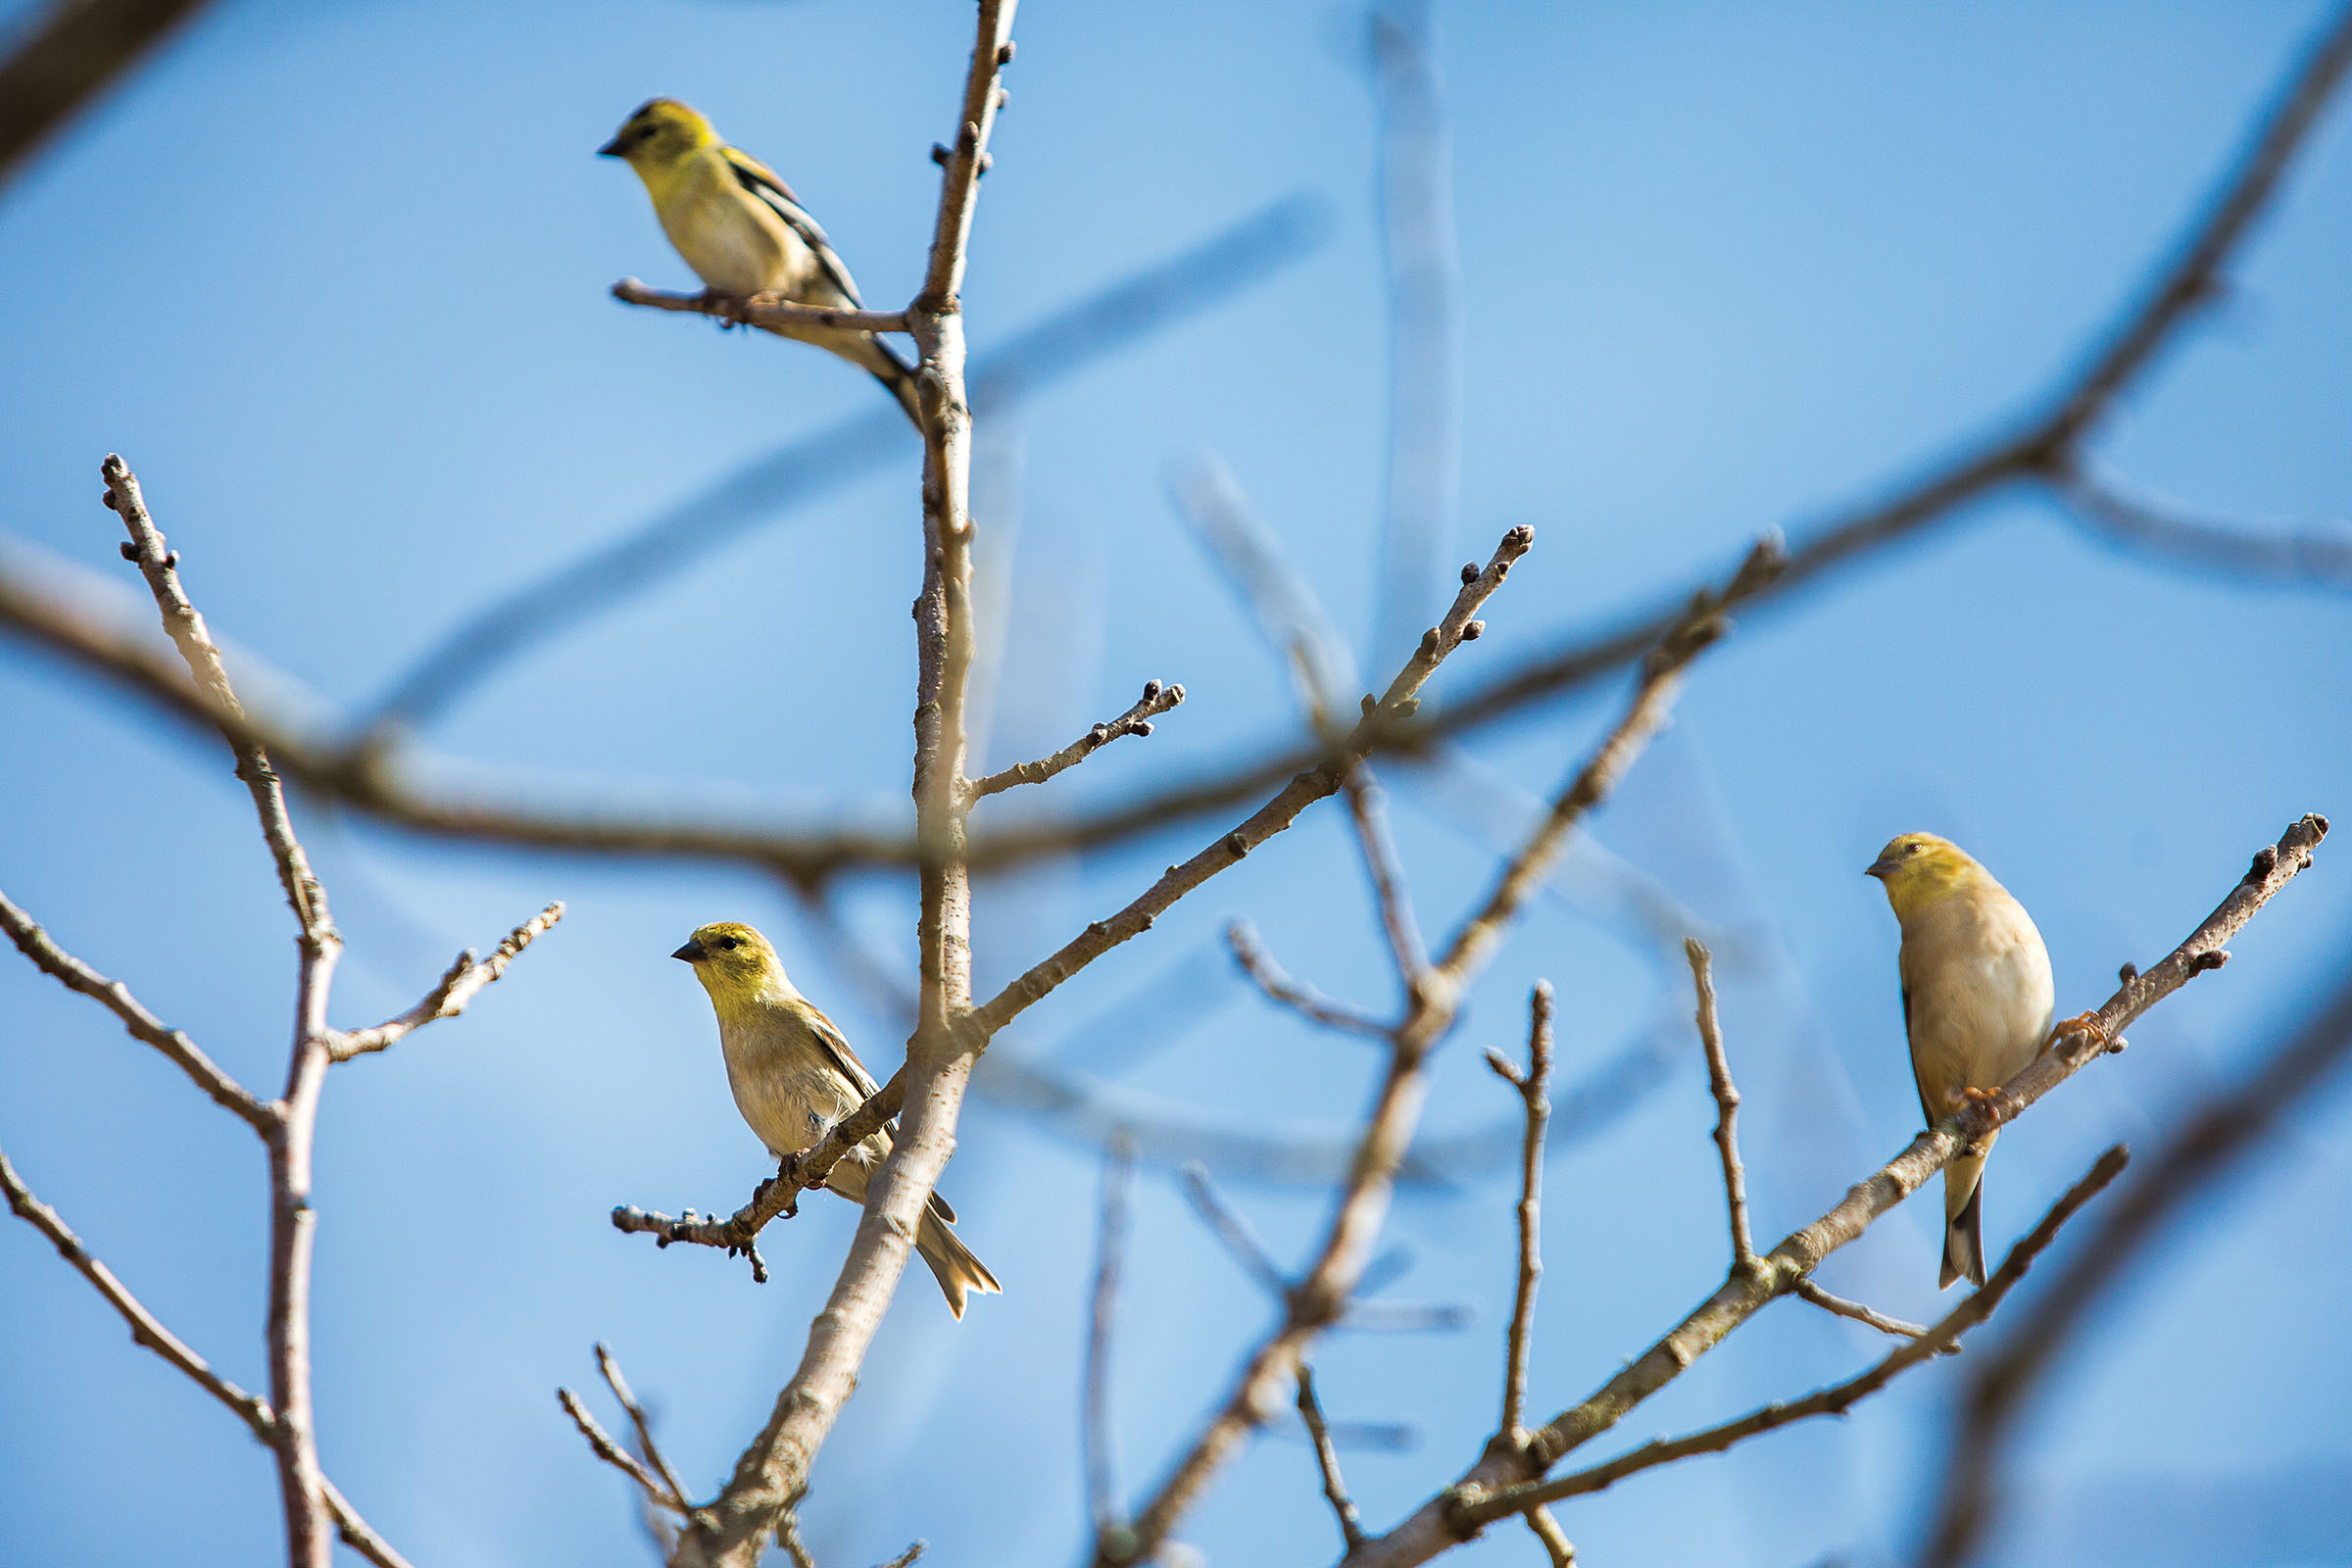 Three yellow birds sit in bare tree branches against a blue sky